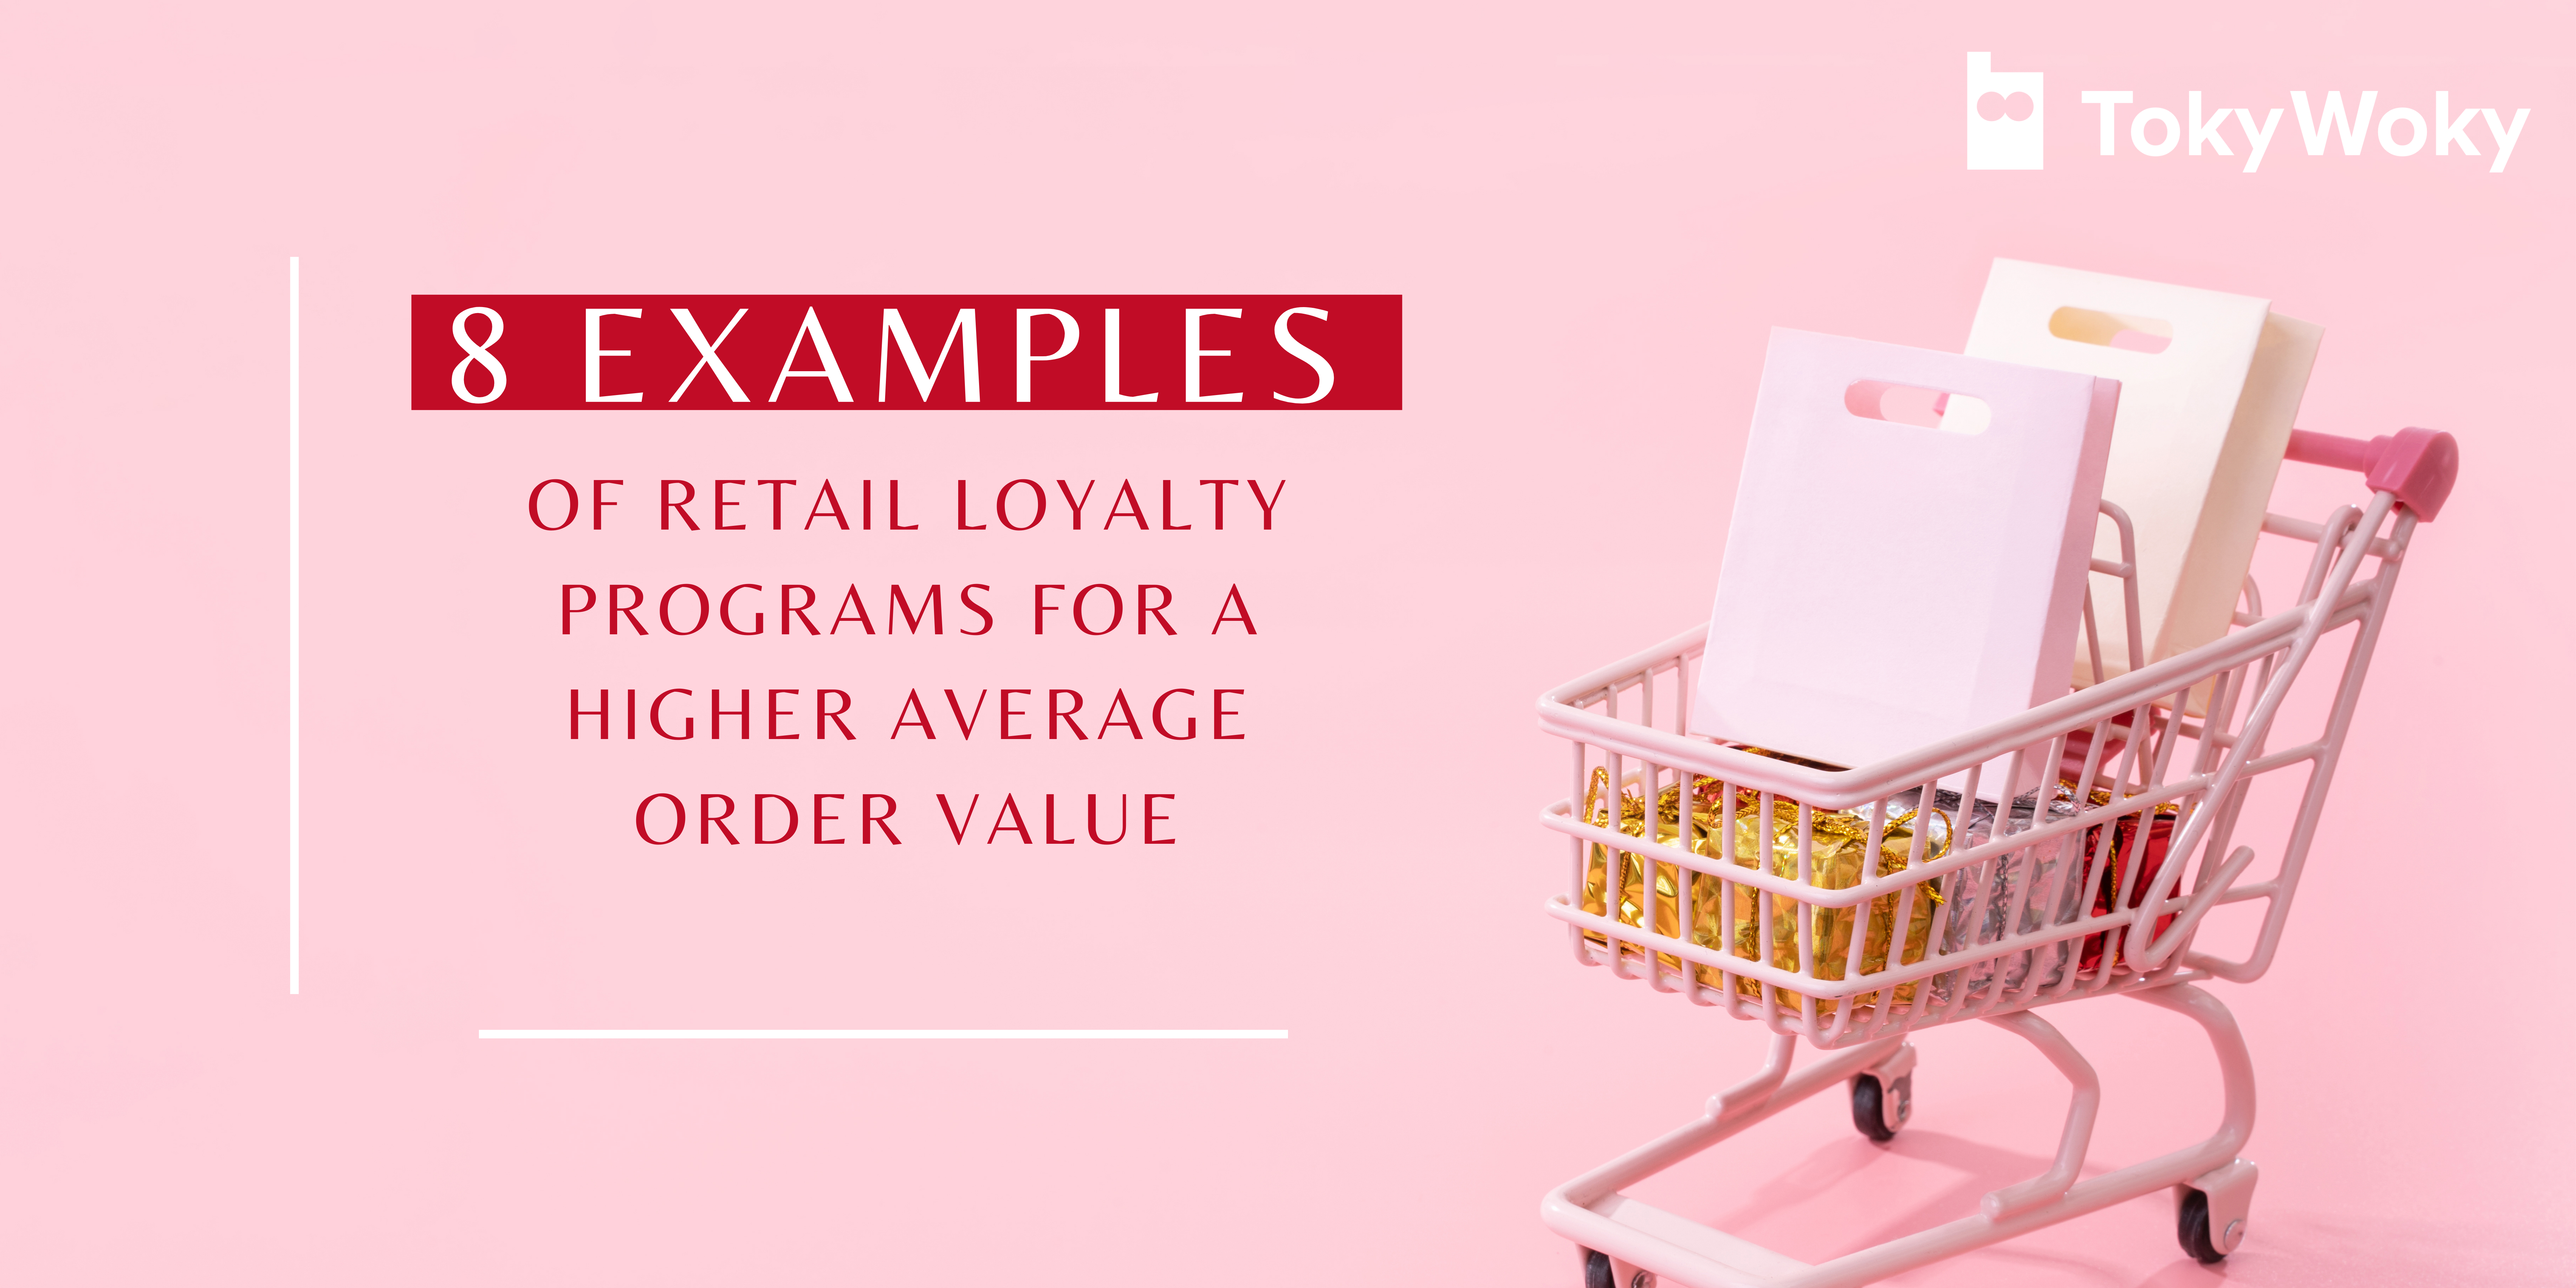 8 examples of retail loyalty programs for a higher average order value